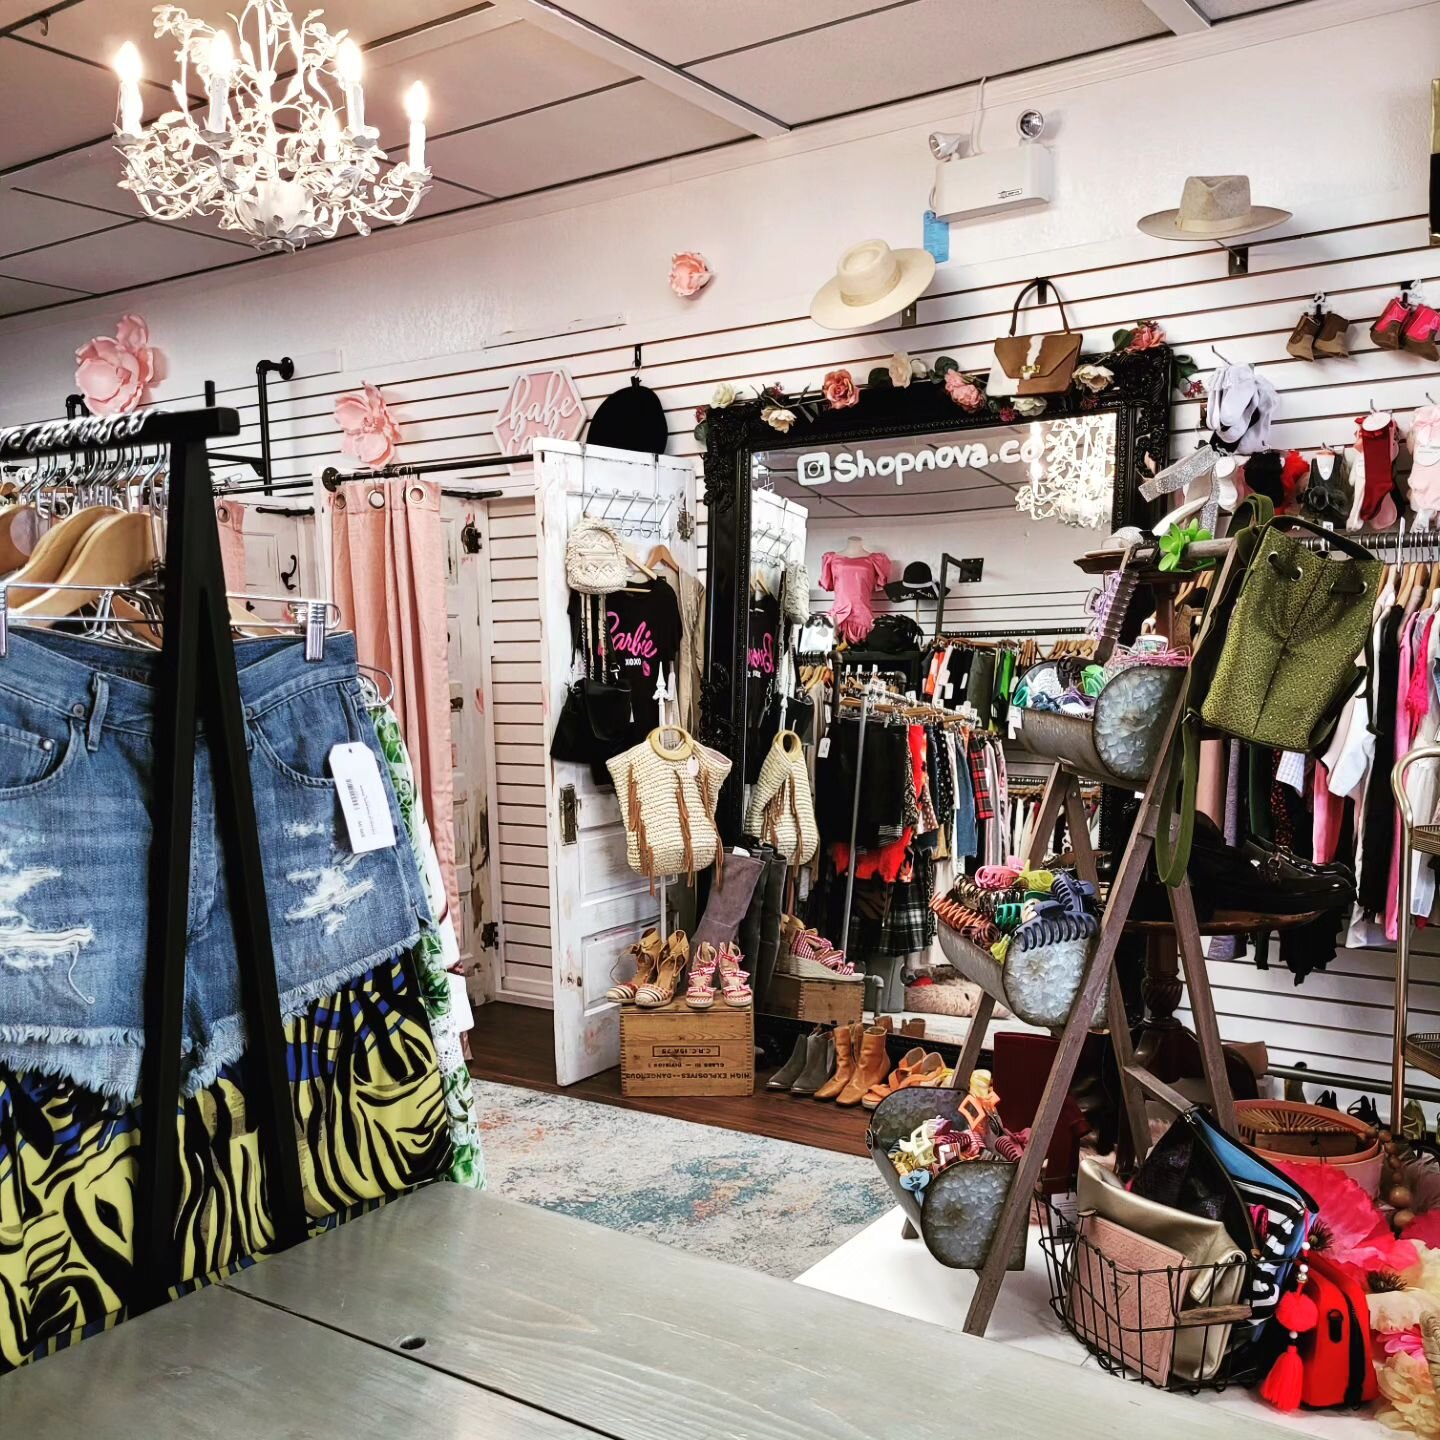 Come stop in at Langley's favourite consignment boutique! We are stocked full of many unique Summer items, from purses and shoes to women's dresses, activewear, sunglasses and more 🌸👗👠 
. 
.
.
.
#consignment #thrift #downtownlangley #langleyoneway